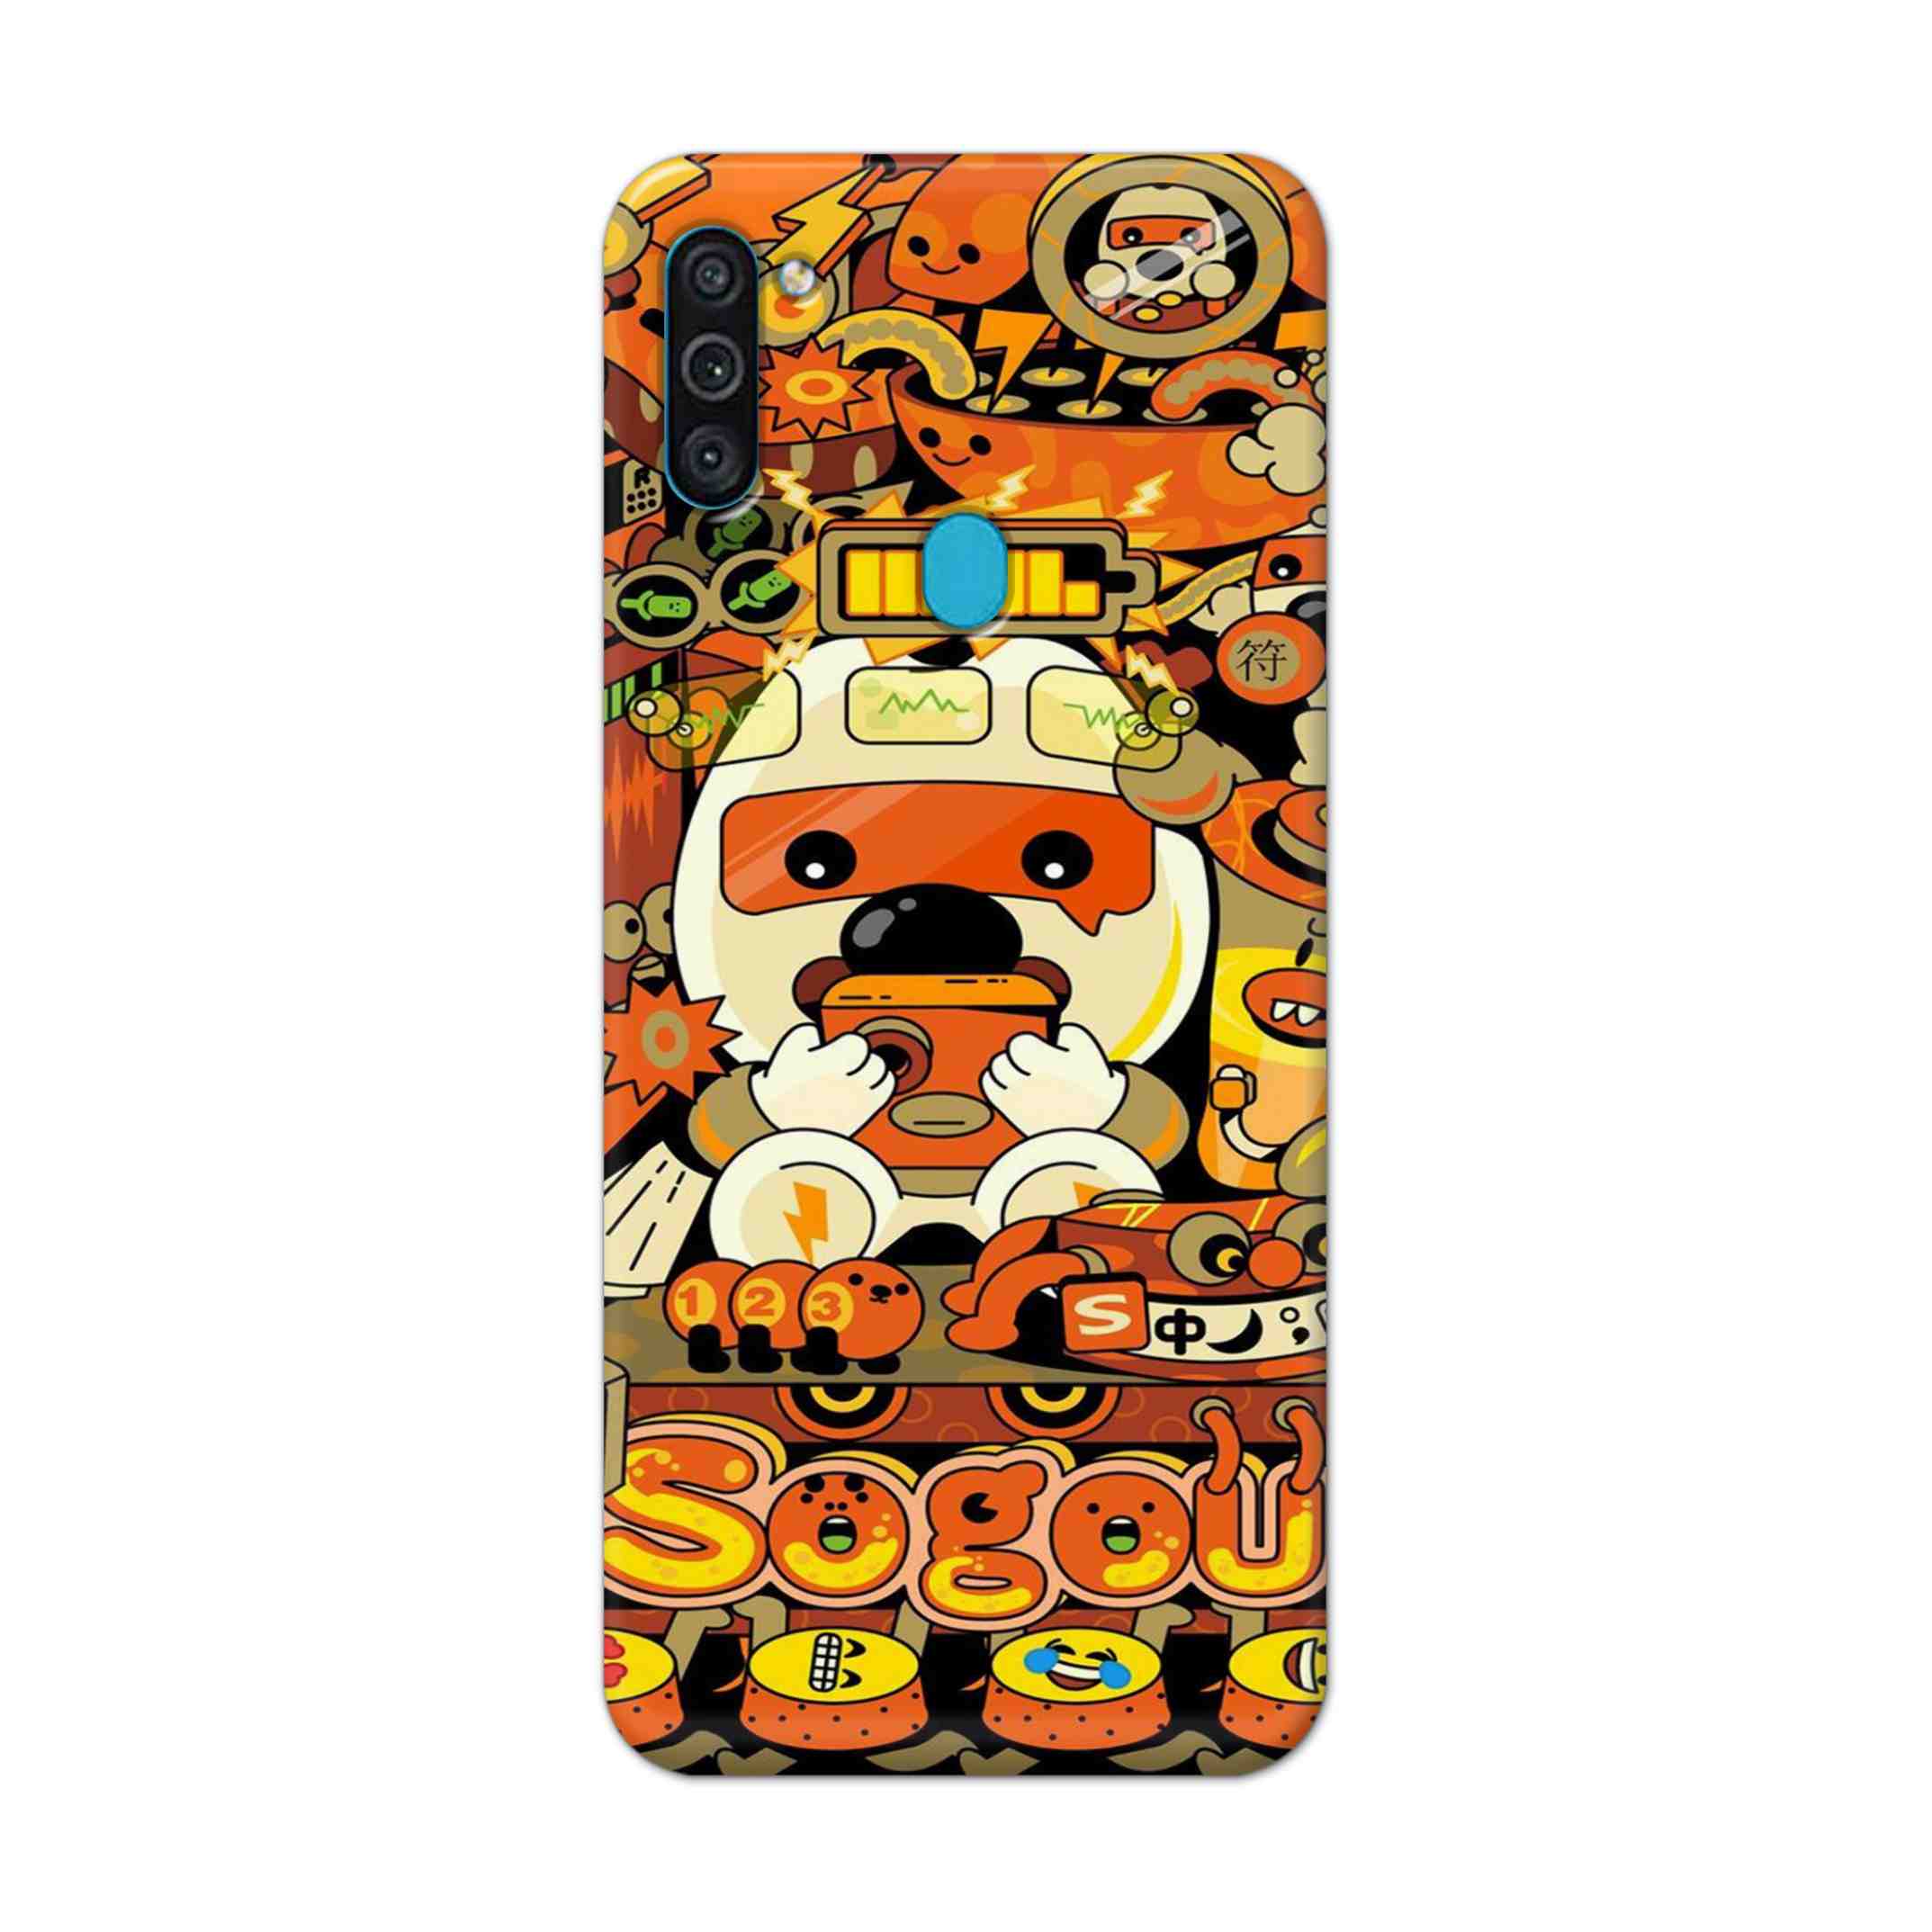 Buy Sogou Hard Back Mobile Phone Case Cover For Samsung Galaxy M11 Online